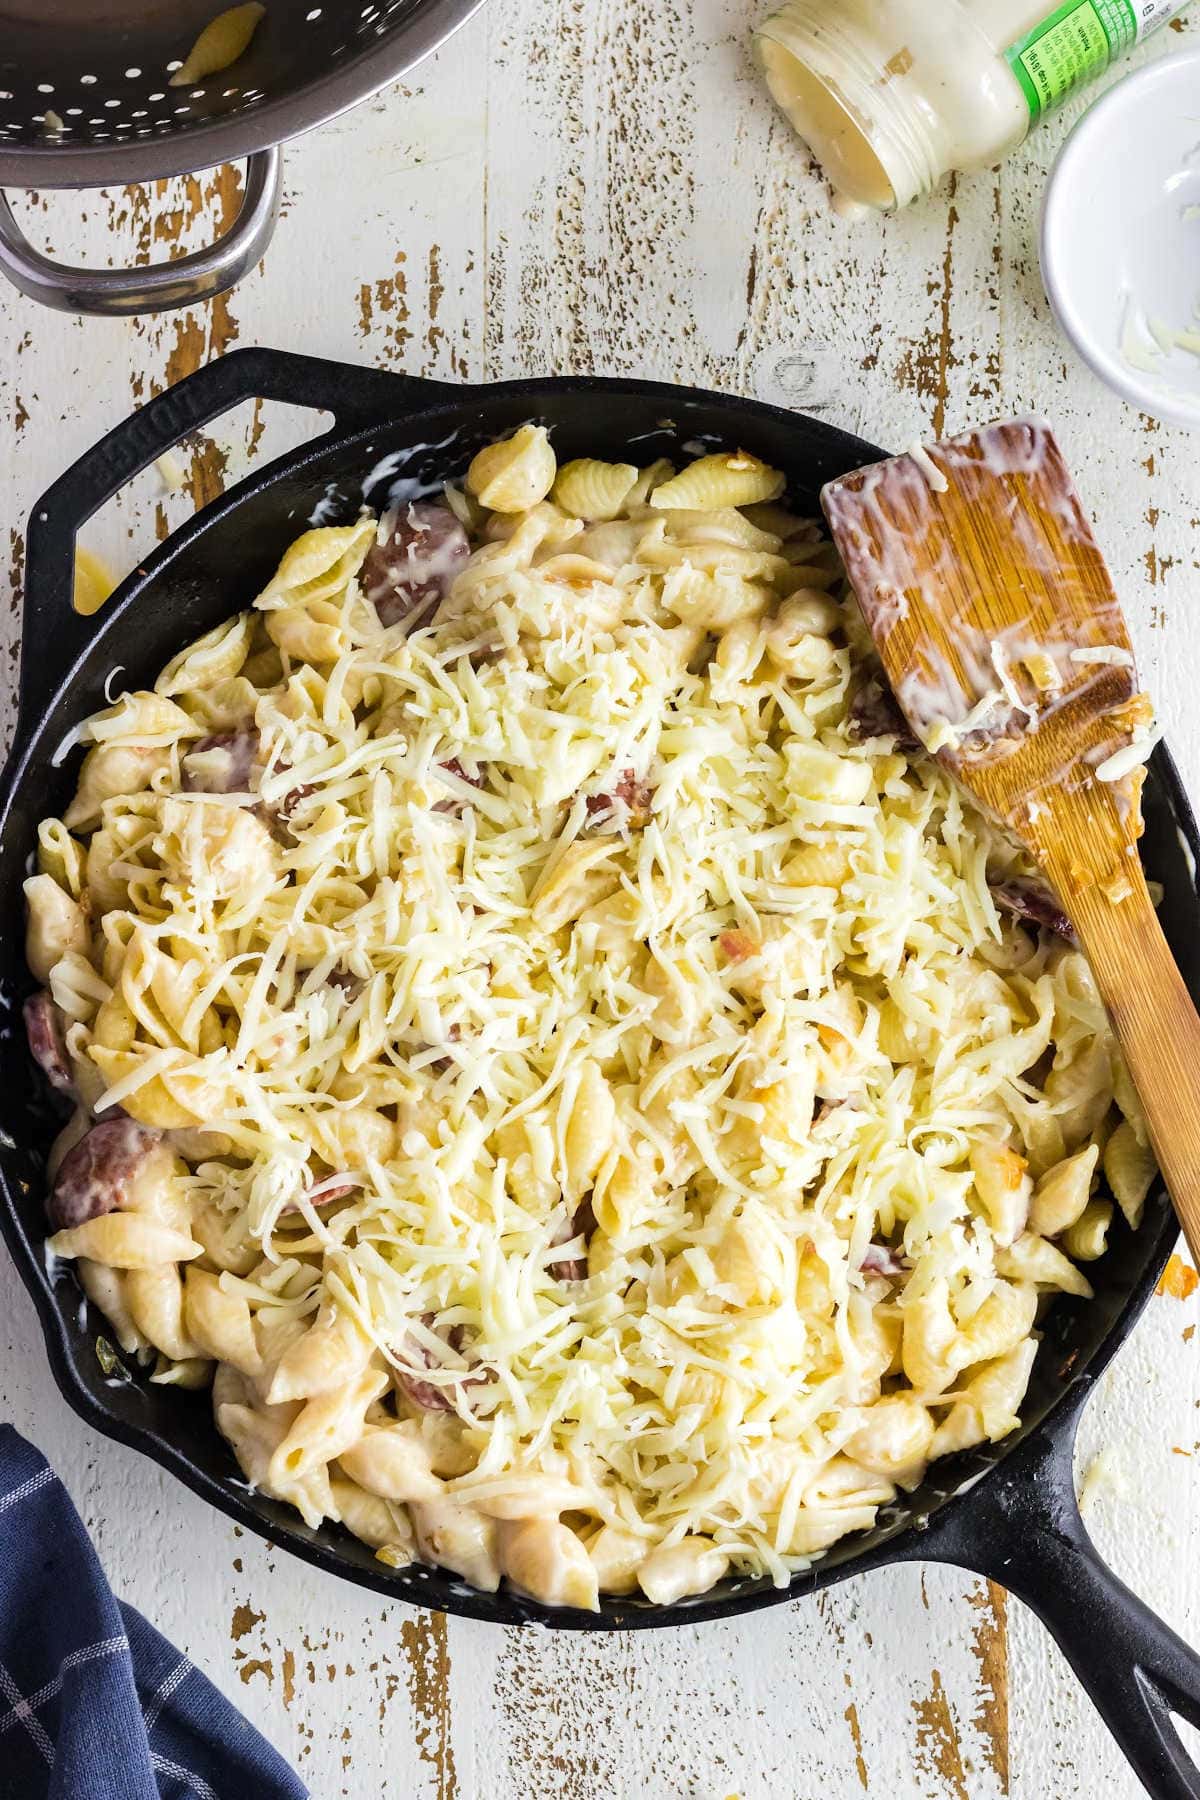 Cheese has been sprinkled on top of the pasta and sausage in the pan.